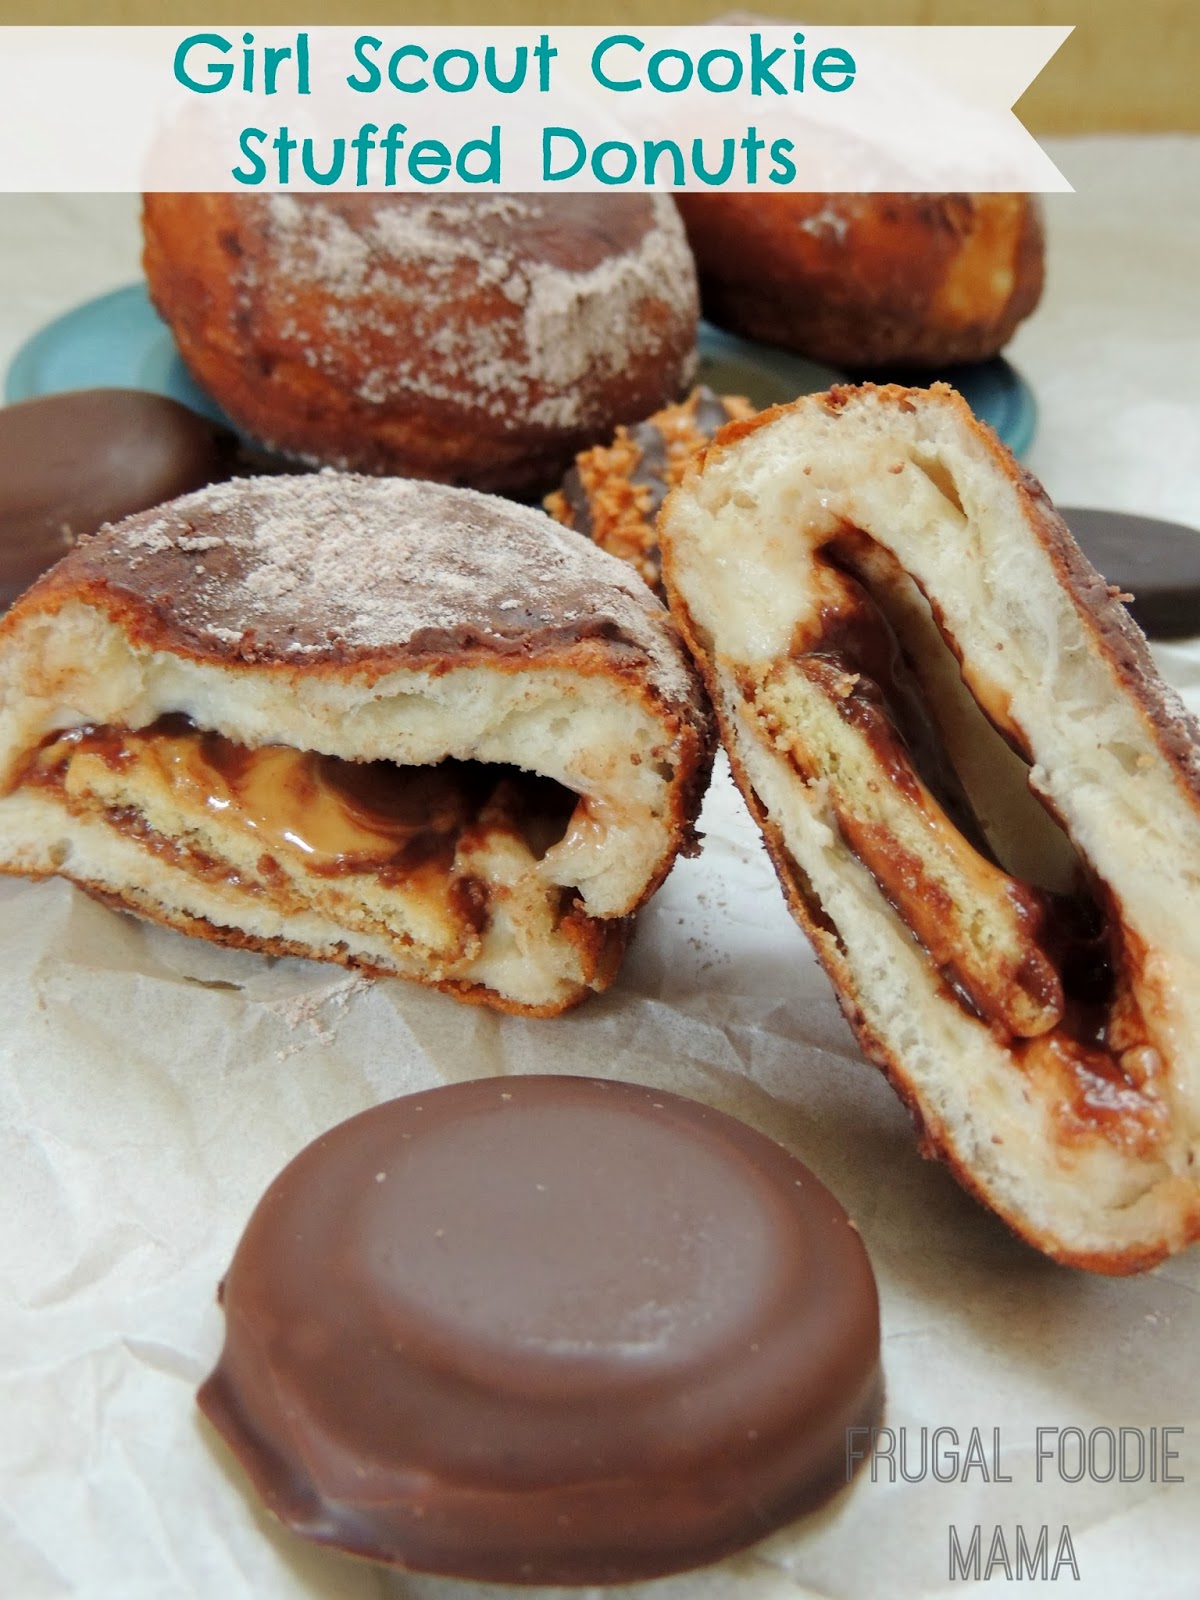 You only need 5 ingredients & just 20 minutes to make these decadent & easy to make Girl Scout Cookie Stuffed Donuts.